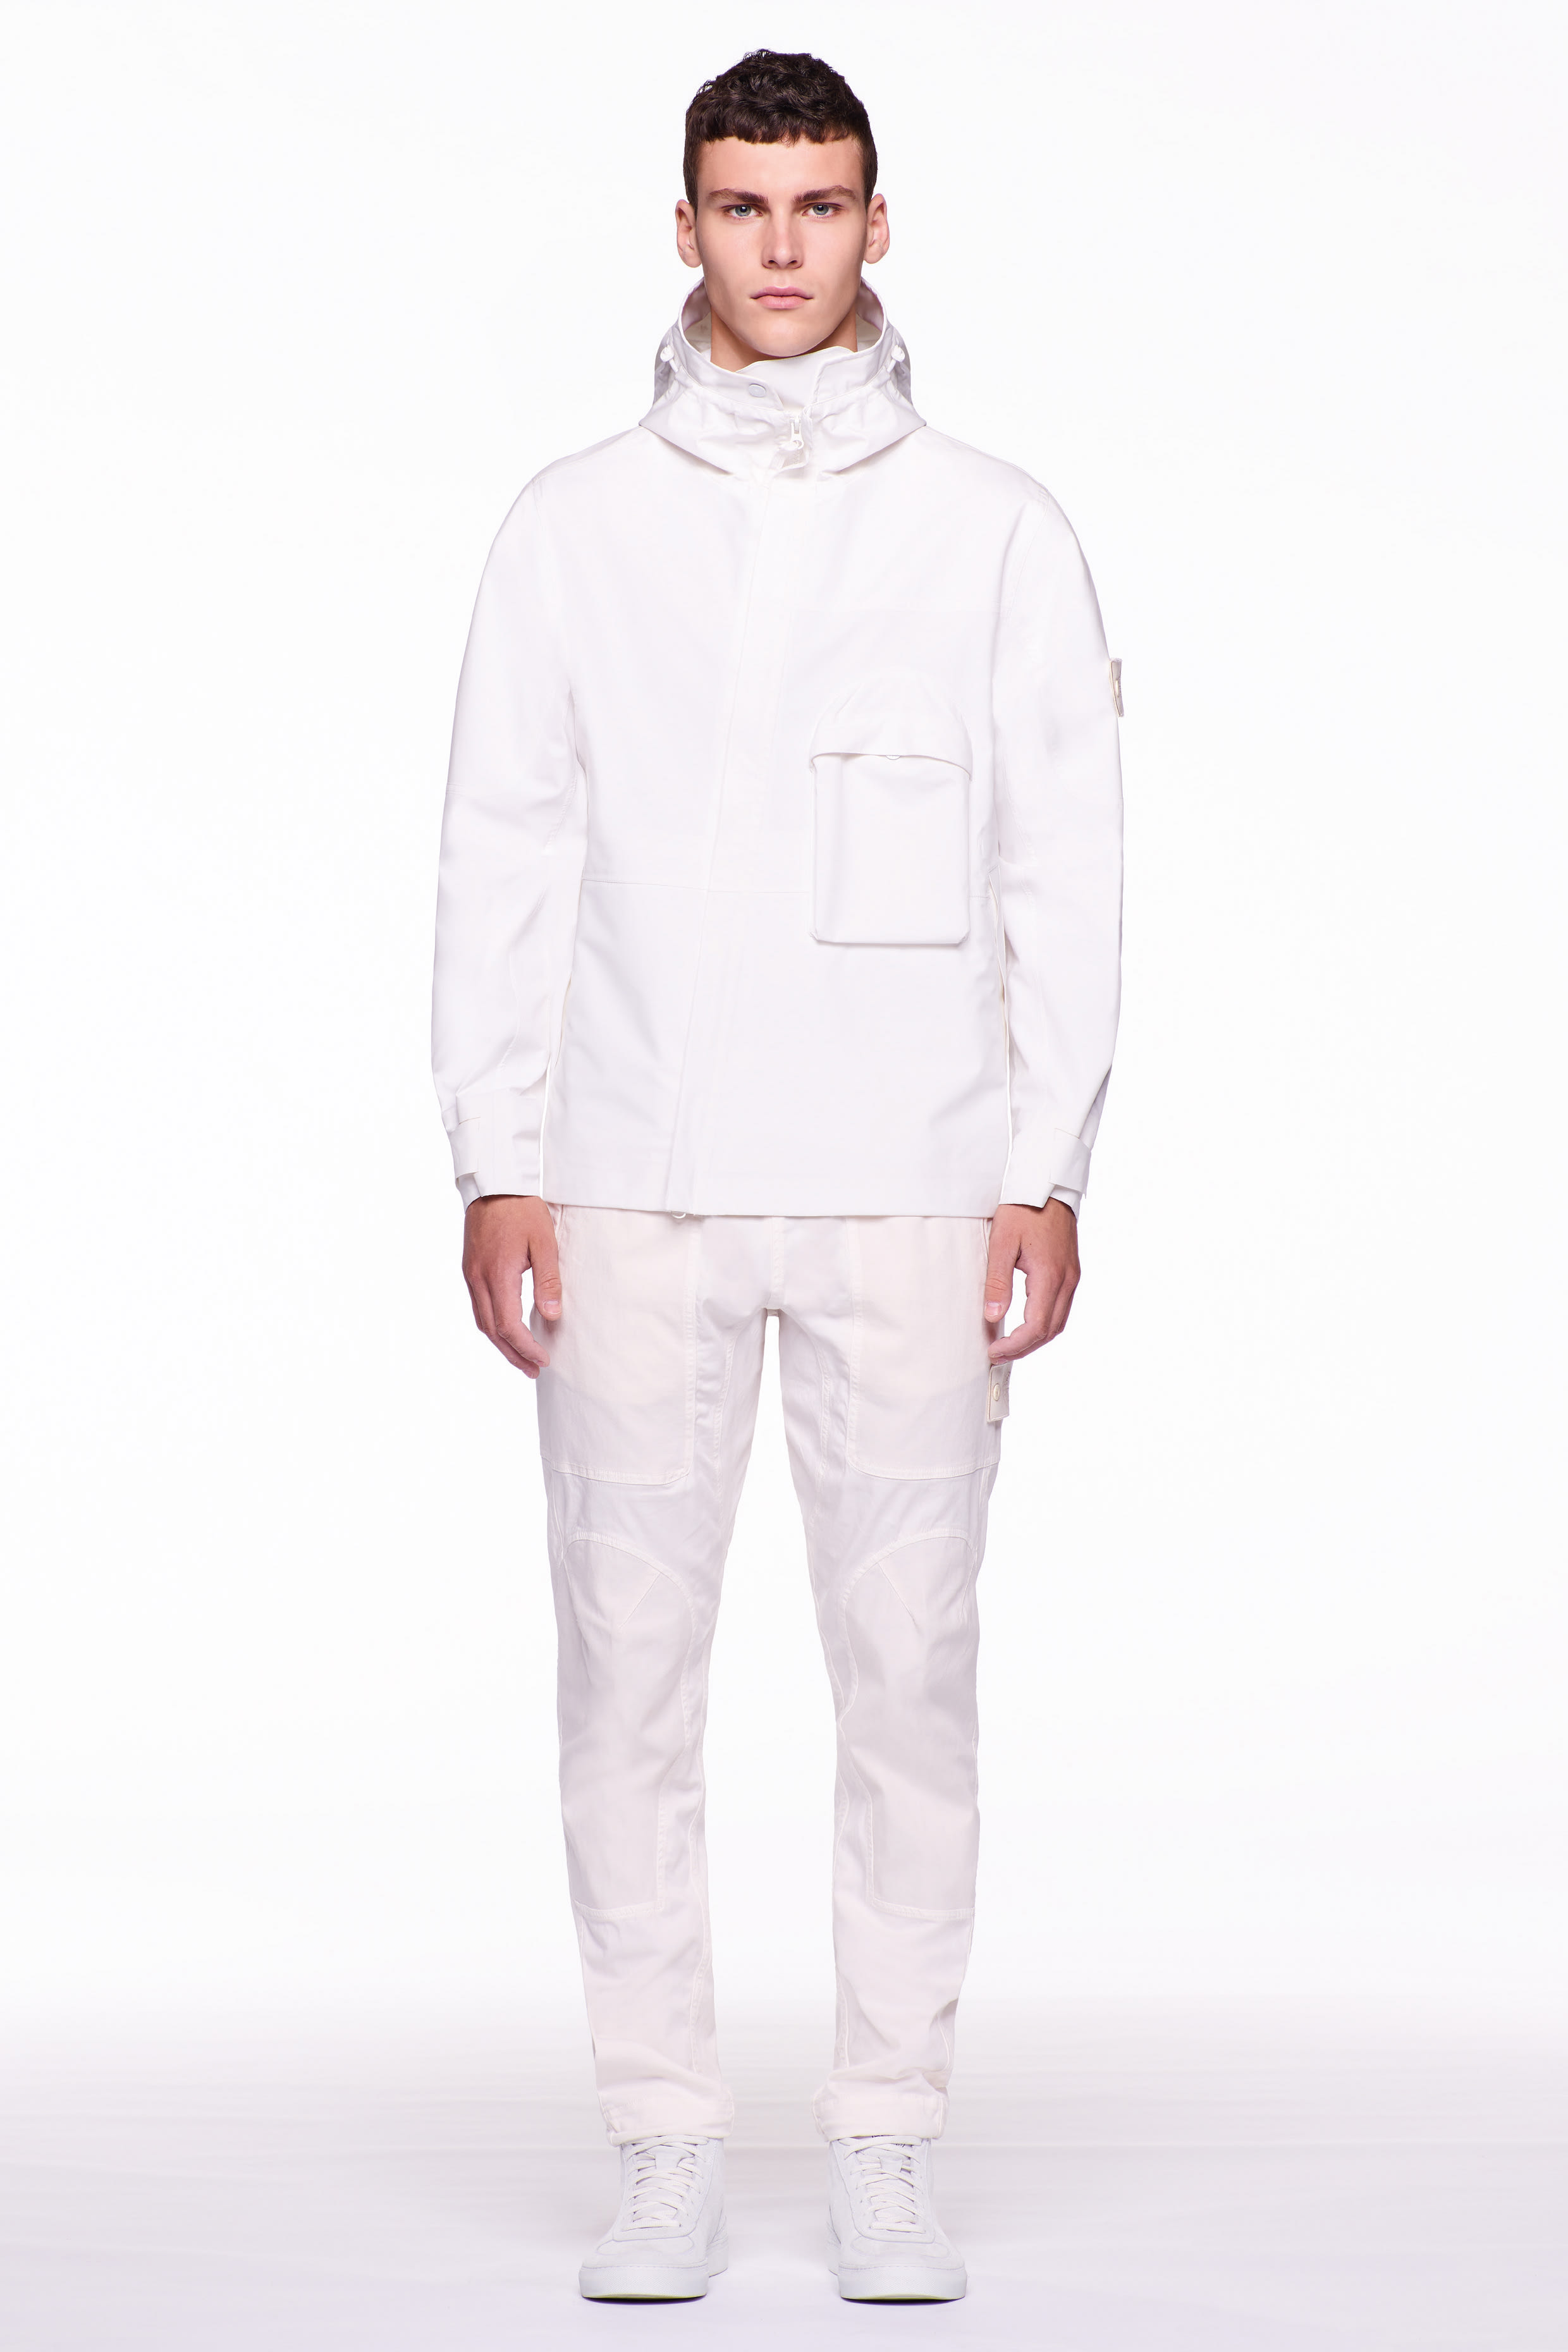 ss18-si1